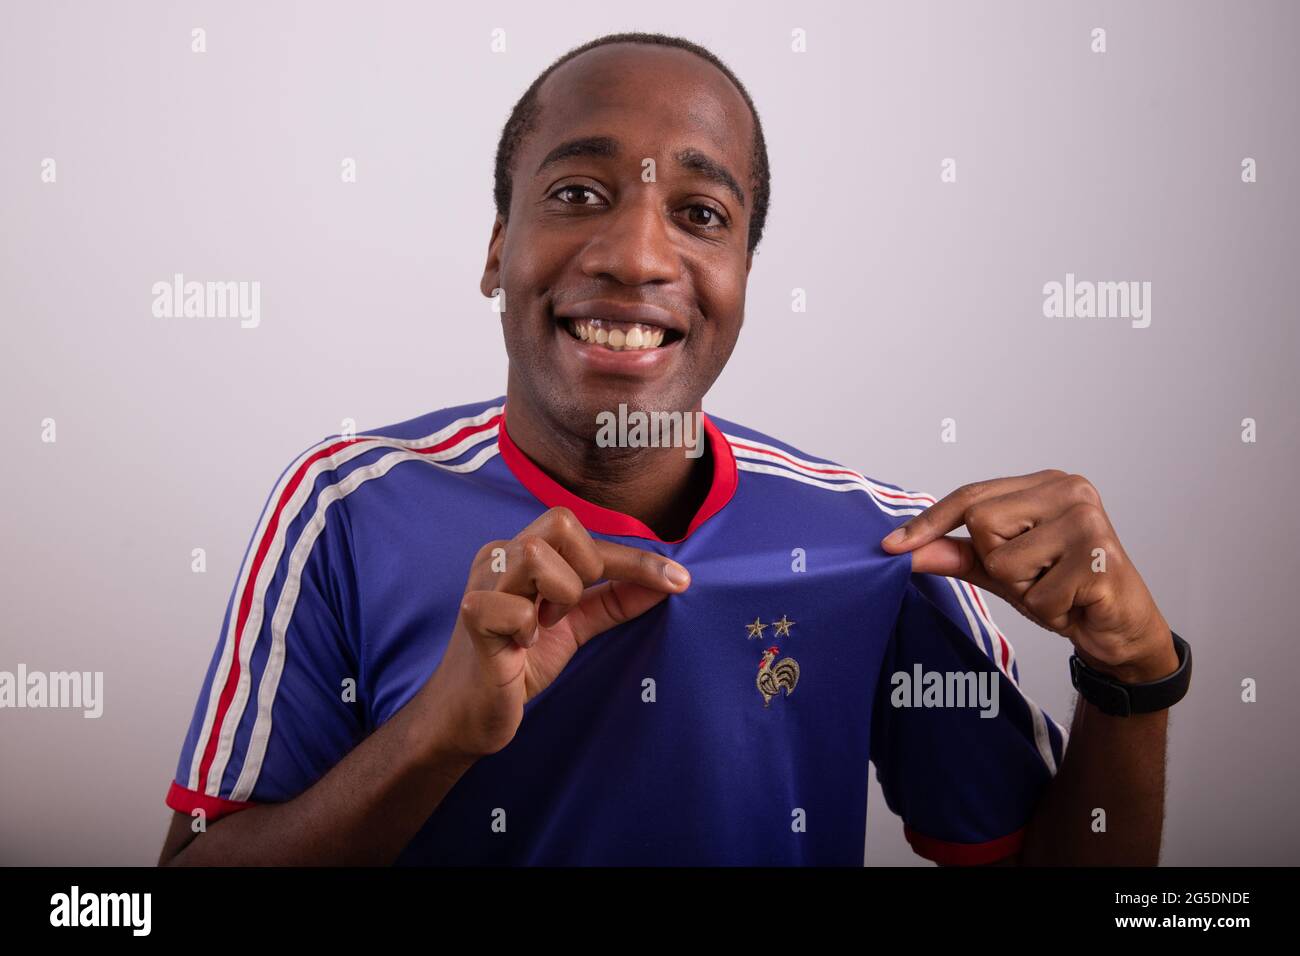 French fan is happy and celebrates the victory of France, he wears the jersey of the french national football team and shows the french rooster. Happy Stock Photo